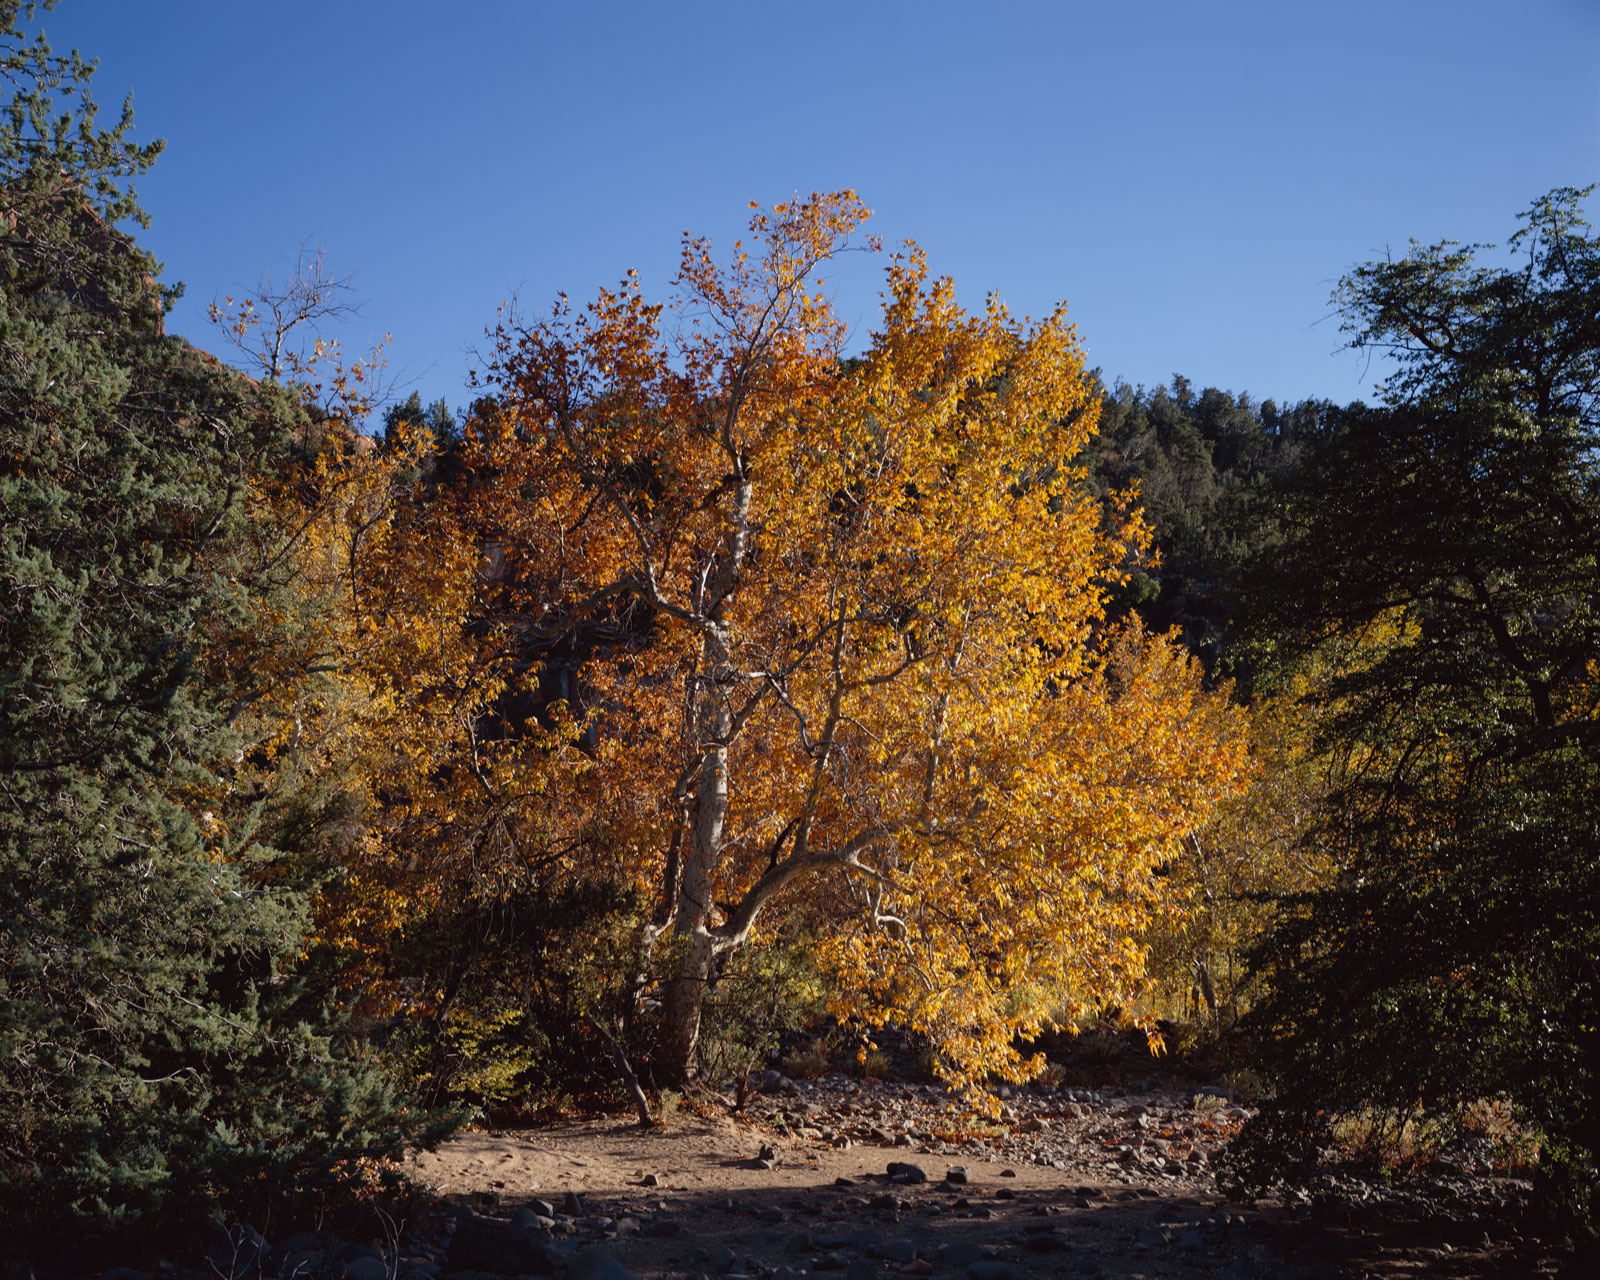 Fall leaves on a lone Sycamore, with Juniper trees in front, at Grasshopper Point north of Sedona